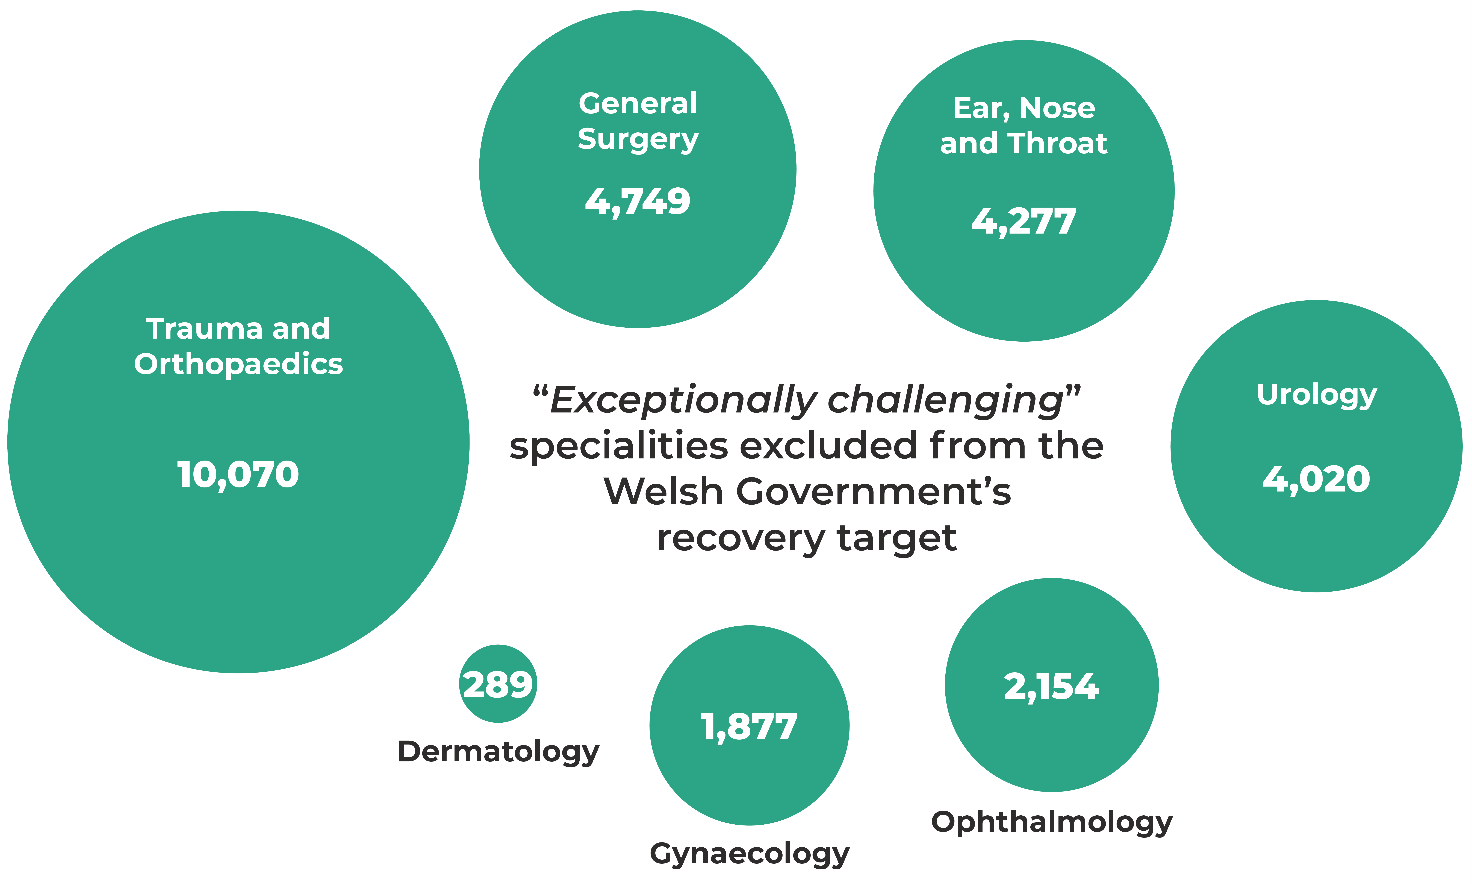 Infographic. Circles with area proportional to the number of patient pathways waiting longer than two years to start treatment. Trauma and orthopaedic 10070. General surgery 4749. Ear, nose and throat 4277. Urology 4020. Ophthalmology 2154. Gynaecology 1877. Dermatology 289.